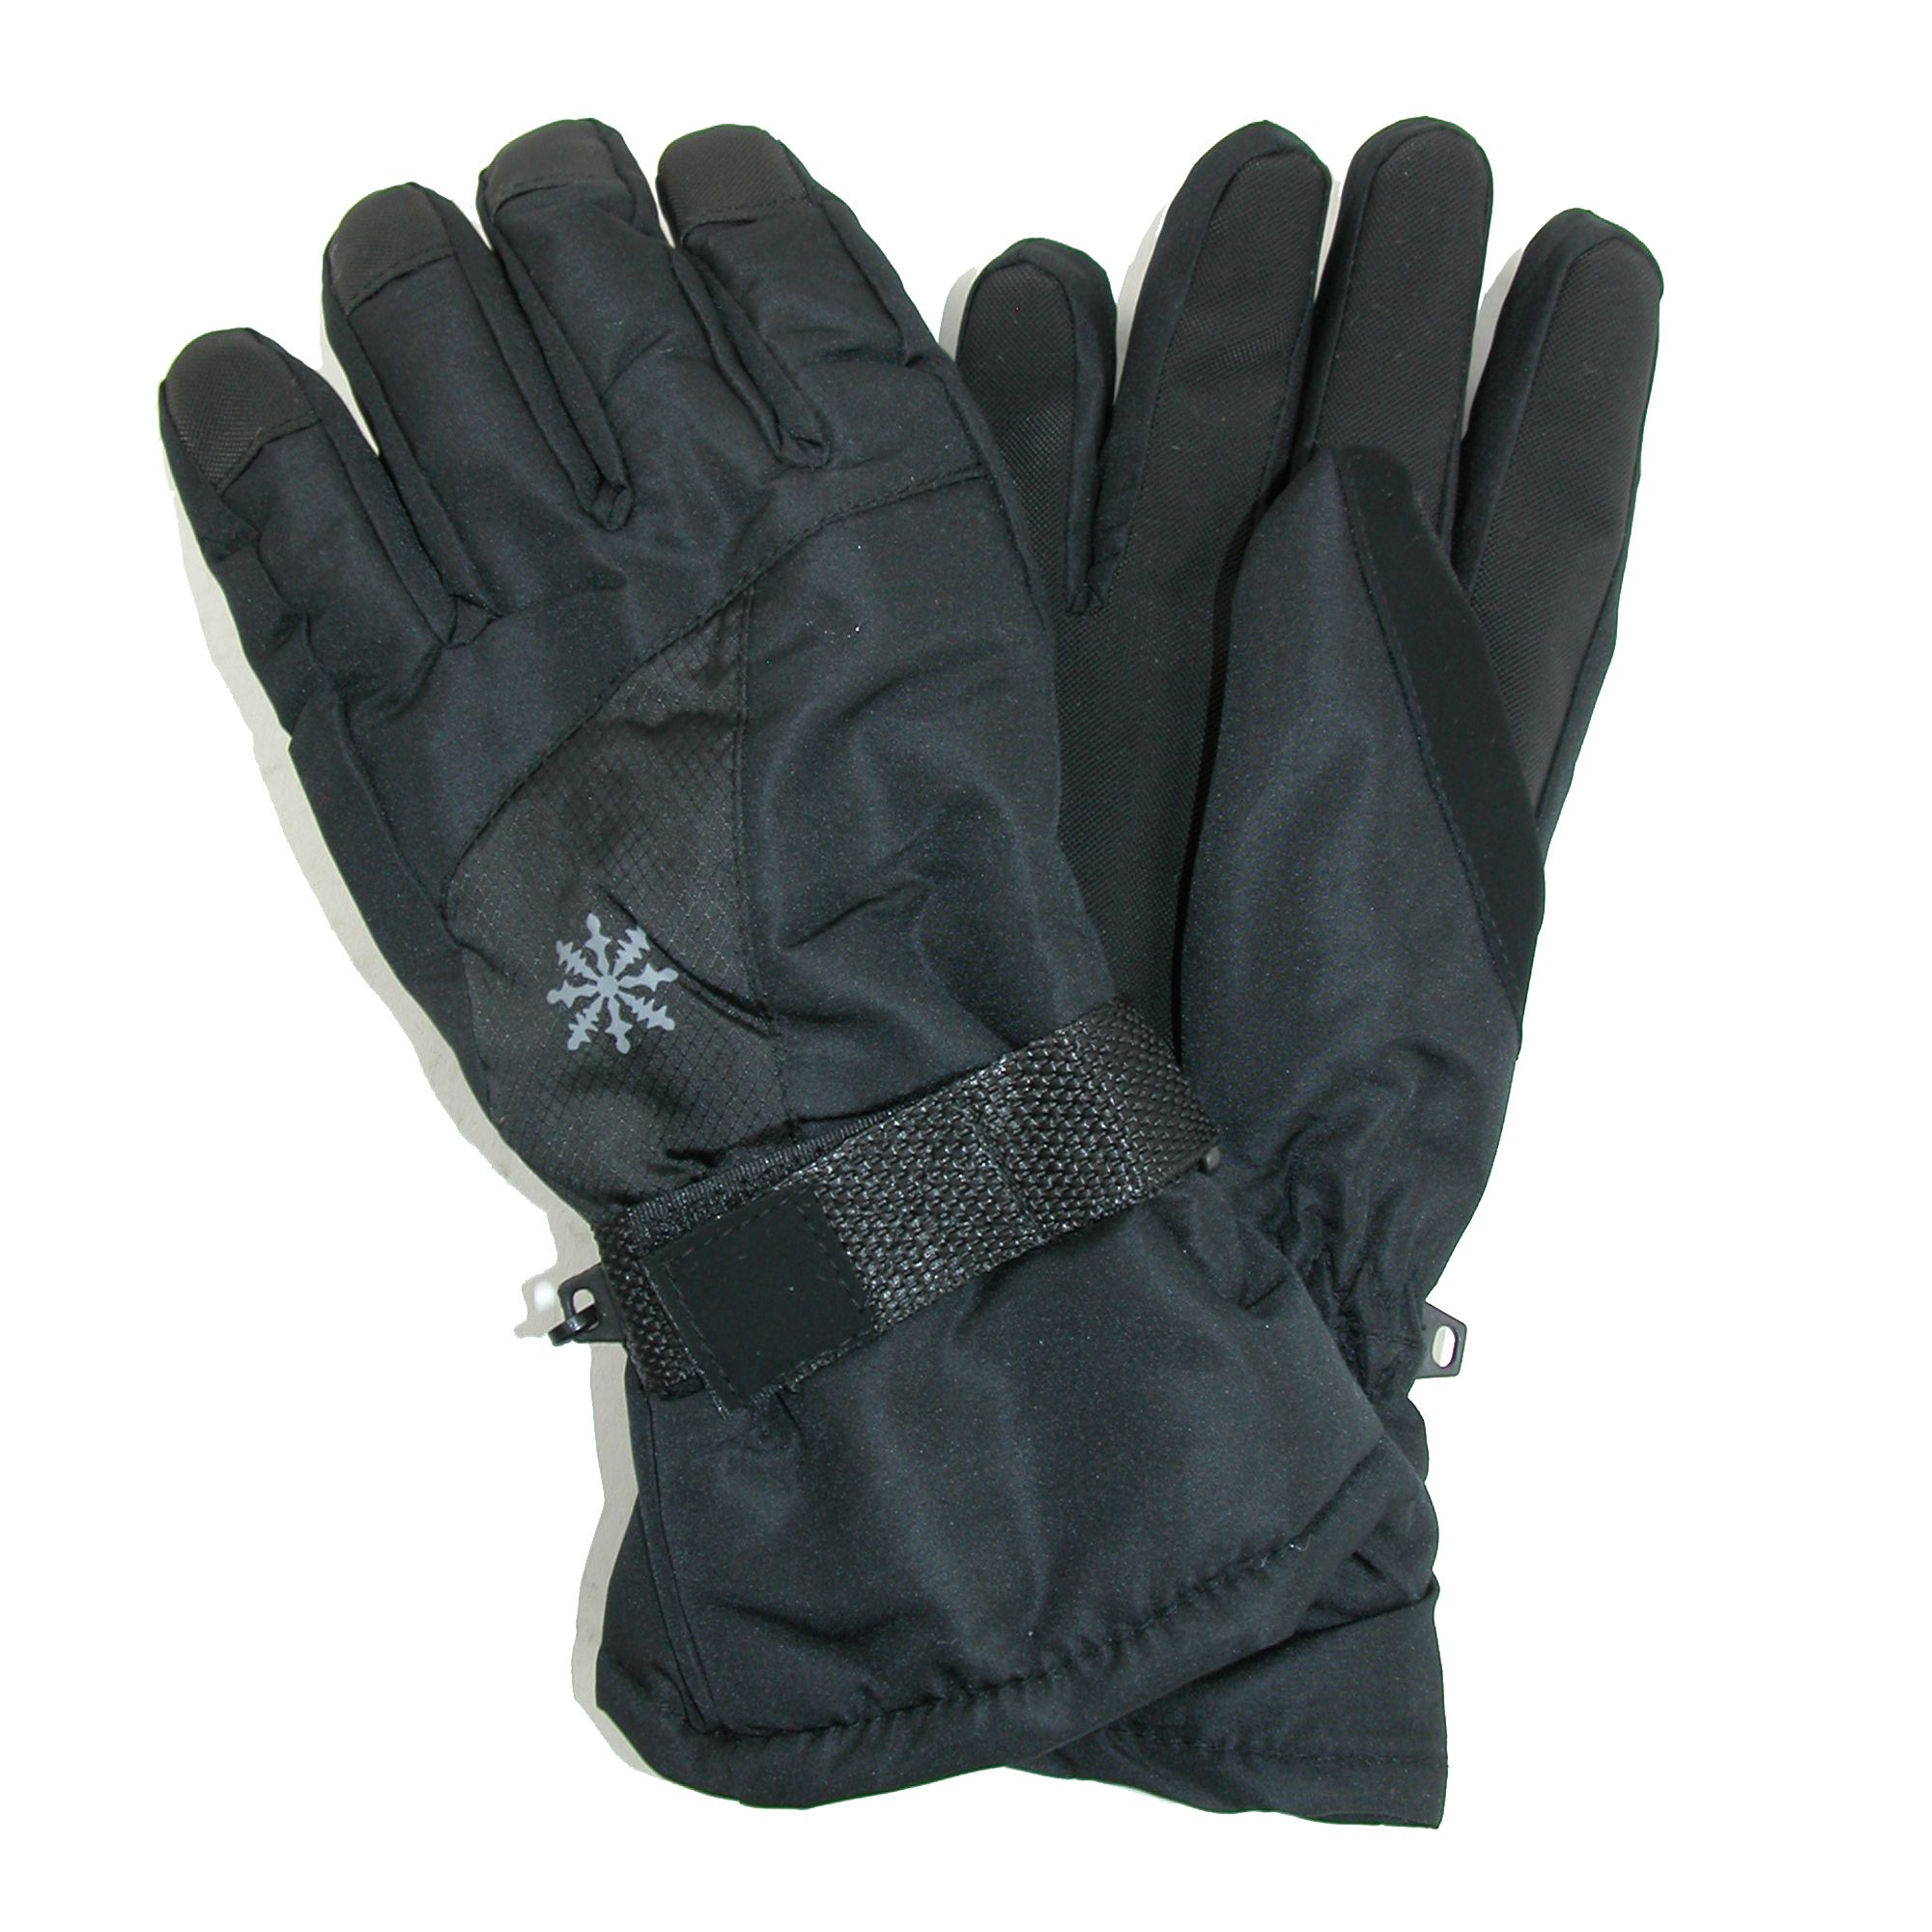 Thinsulate Waterproof Long Black Gloves for Youth Women M L